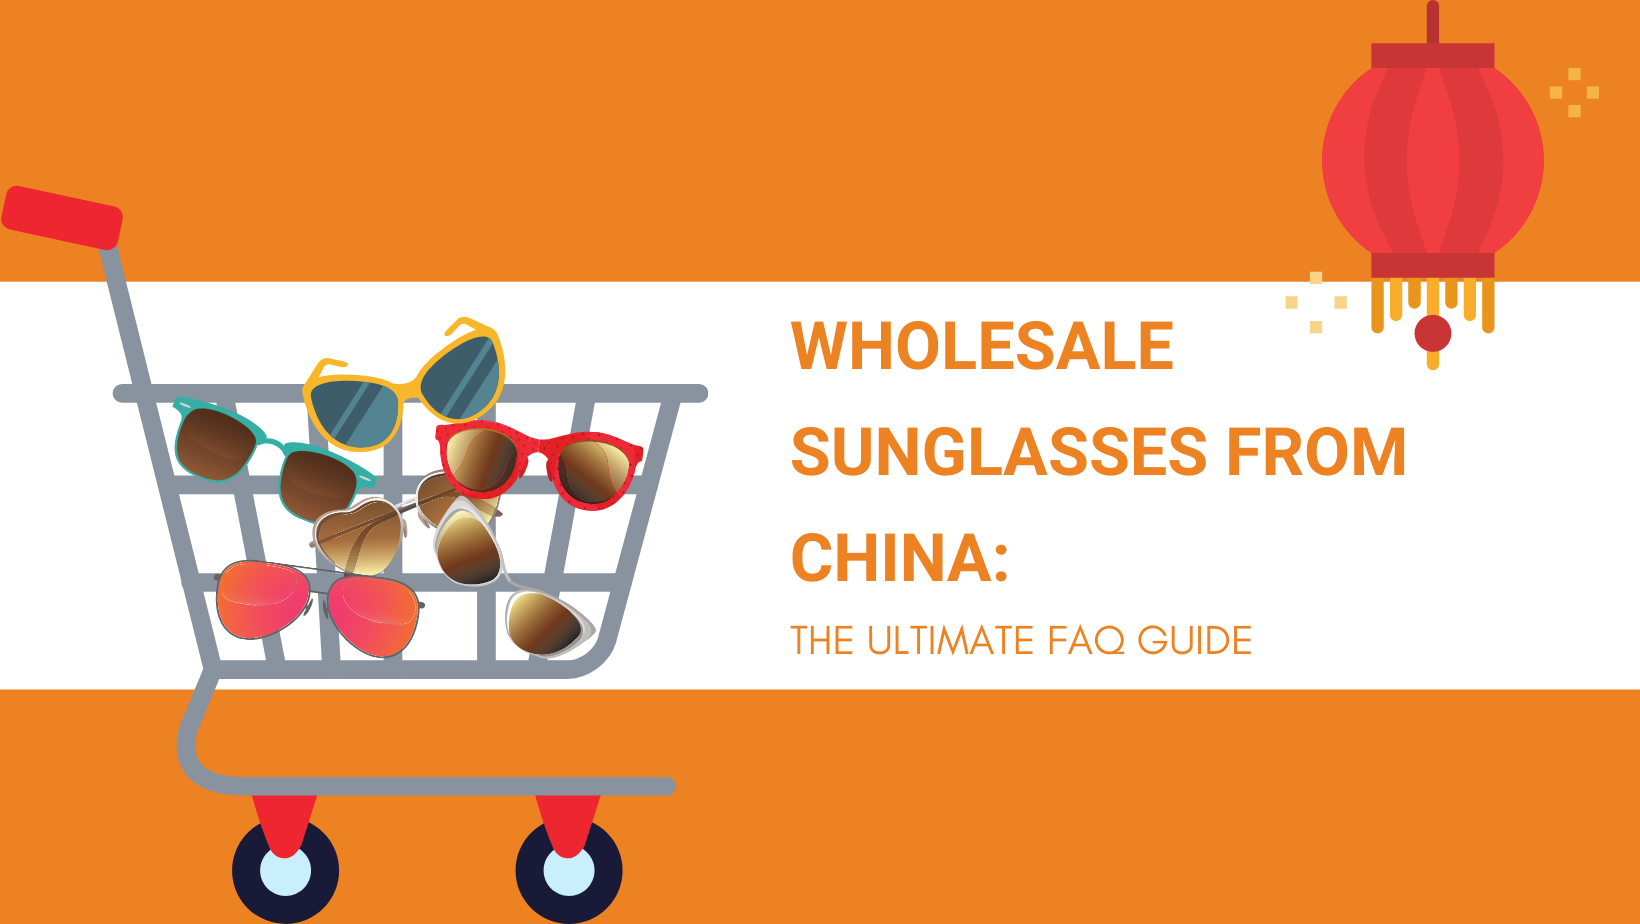 WHOLESALE SUNGLASSES FROM CHINA THE ULTIMATE FAQ GUIDE